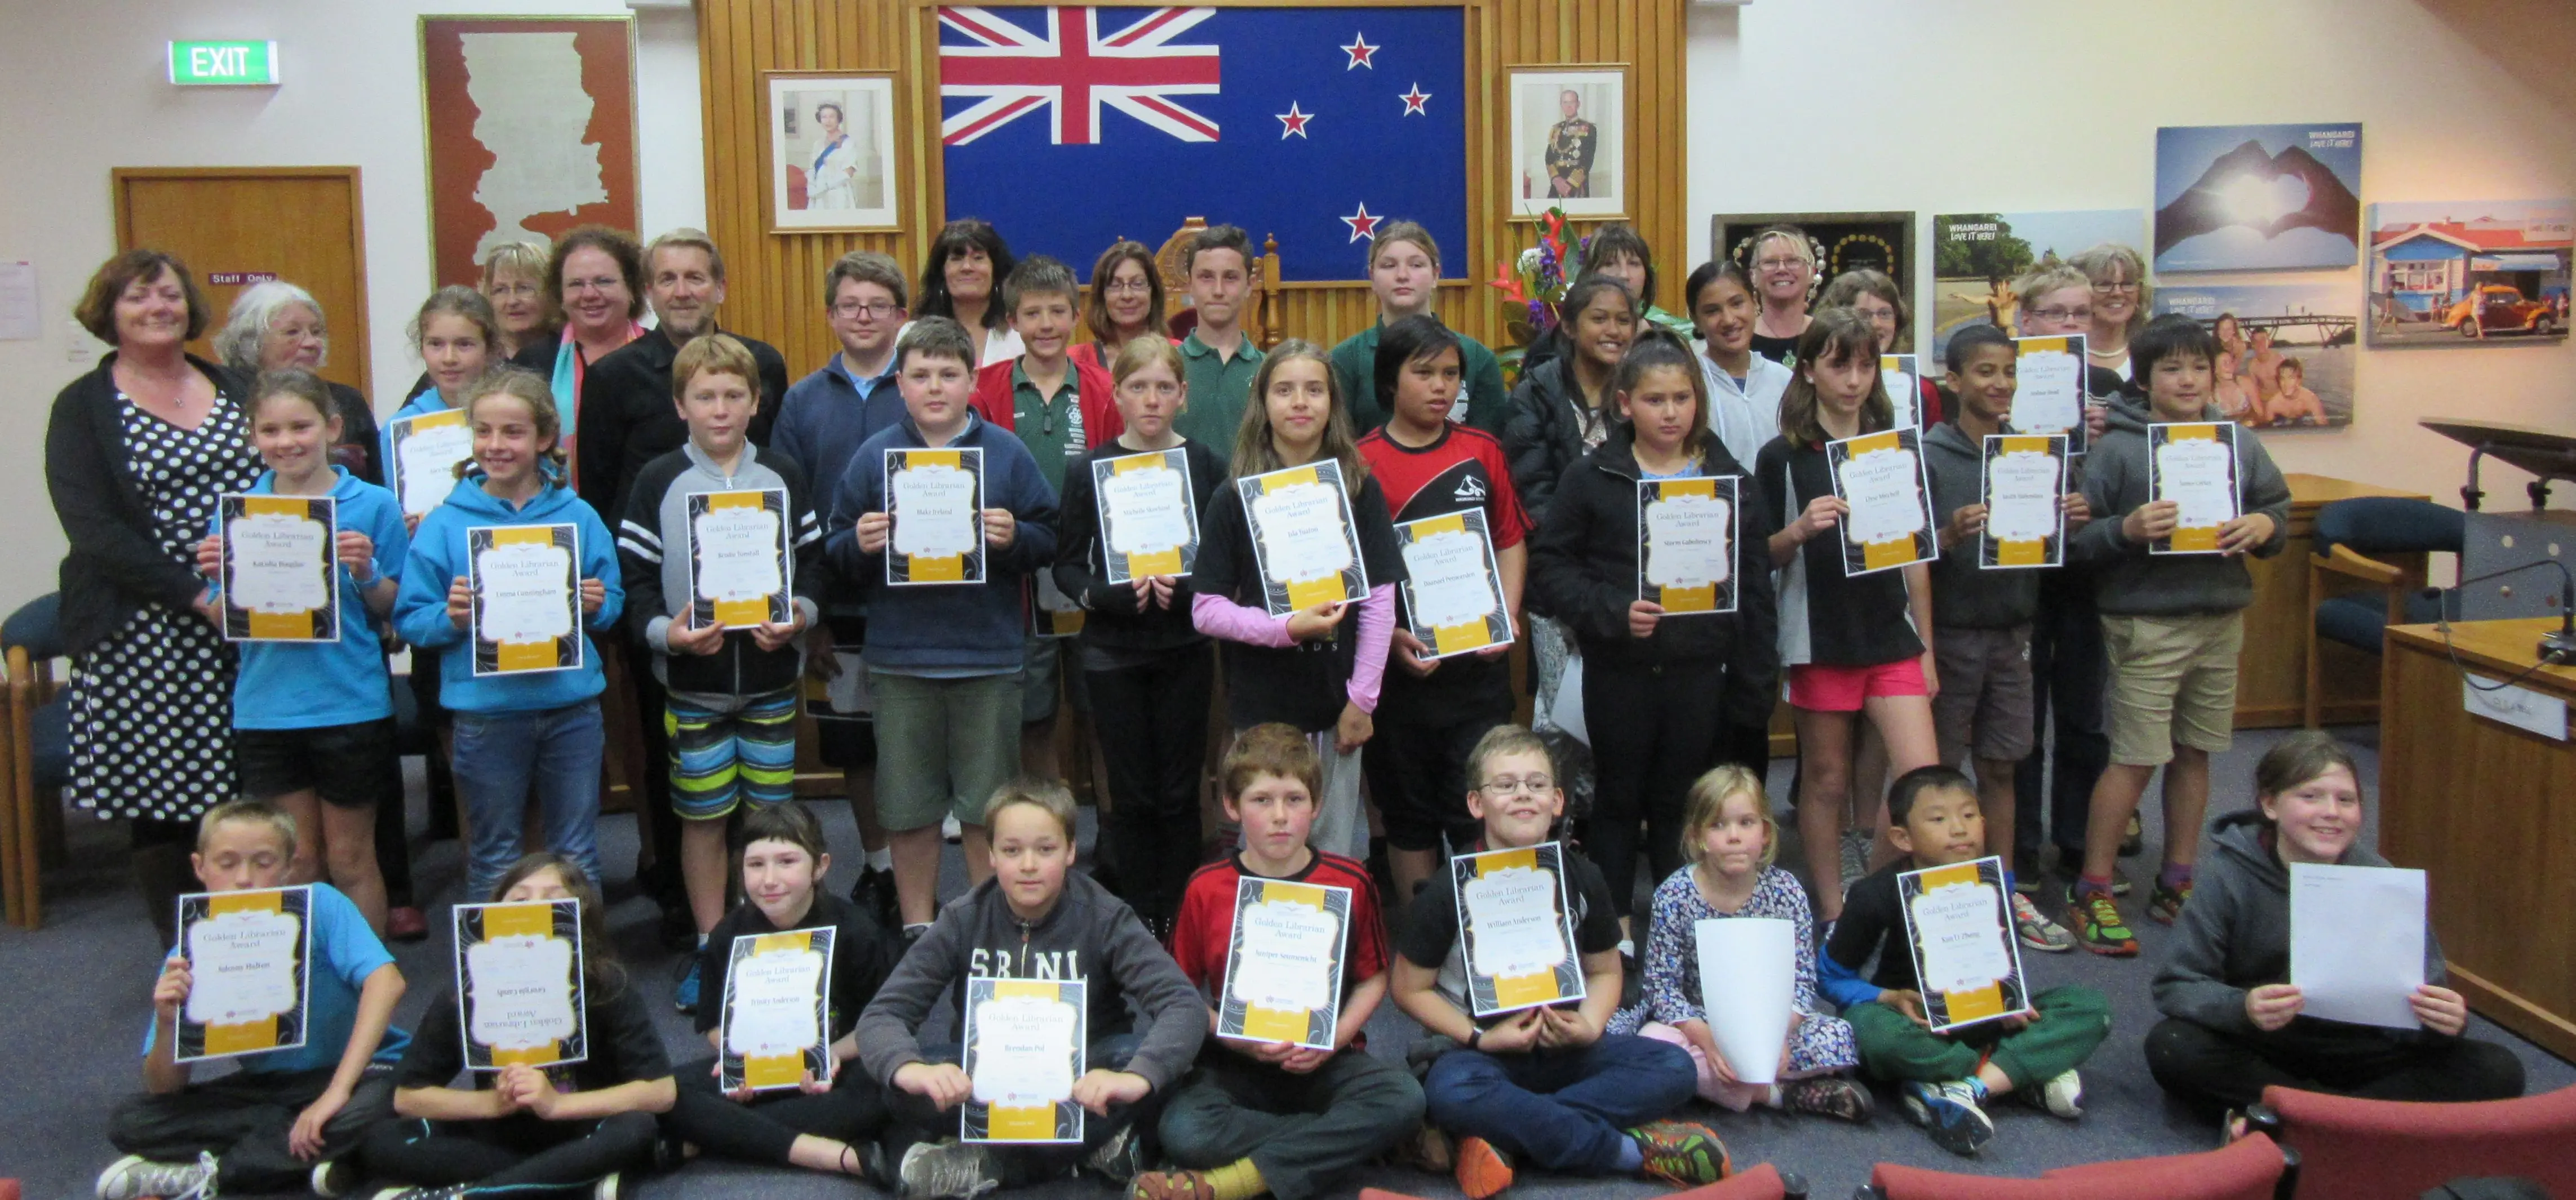 Whangarei schools’ Golden Librarians holding up certificates in the Whangarei Council Chambers.